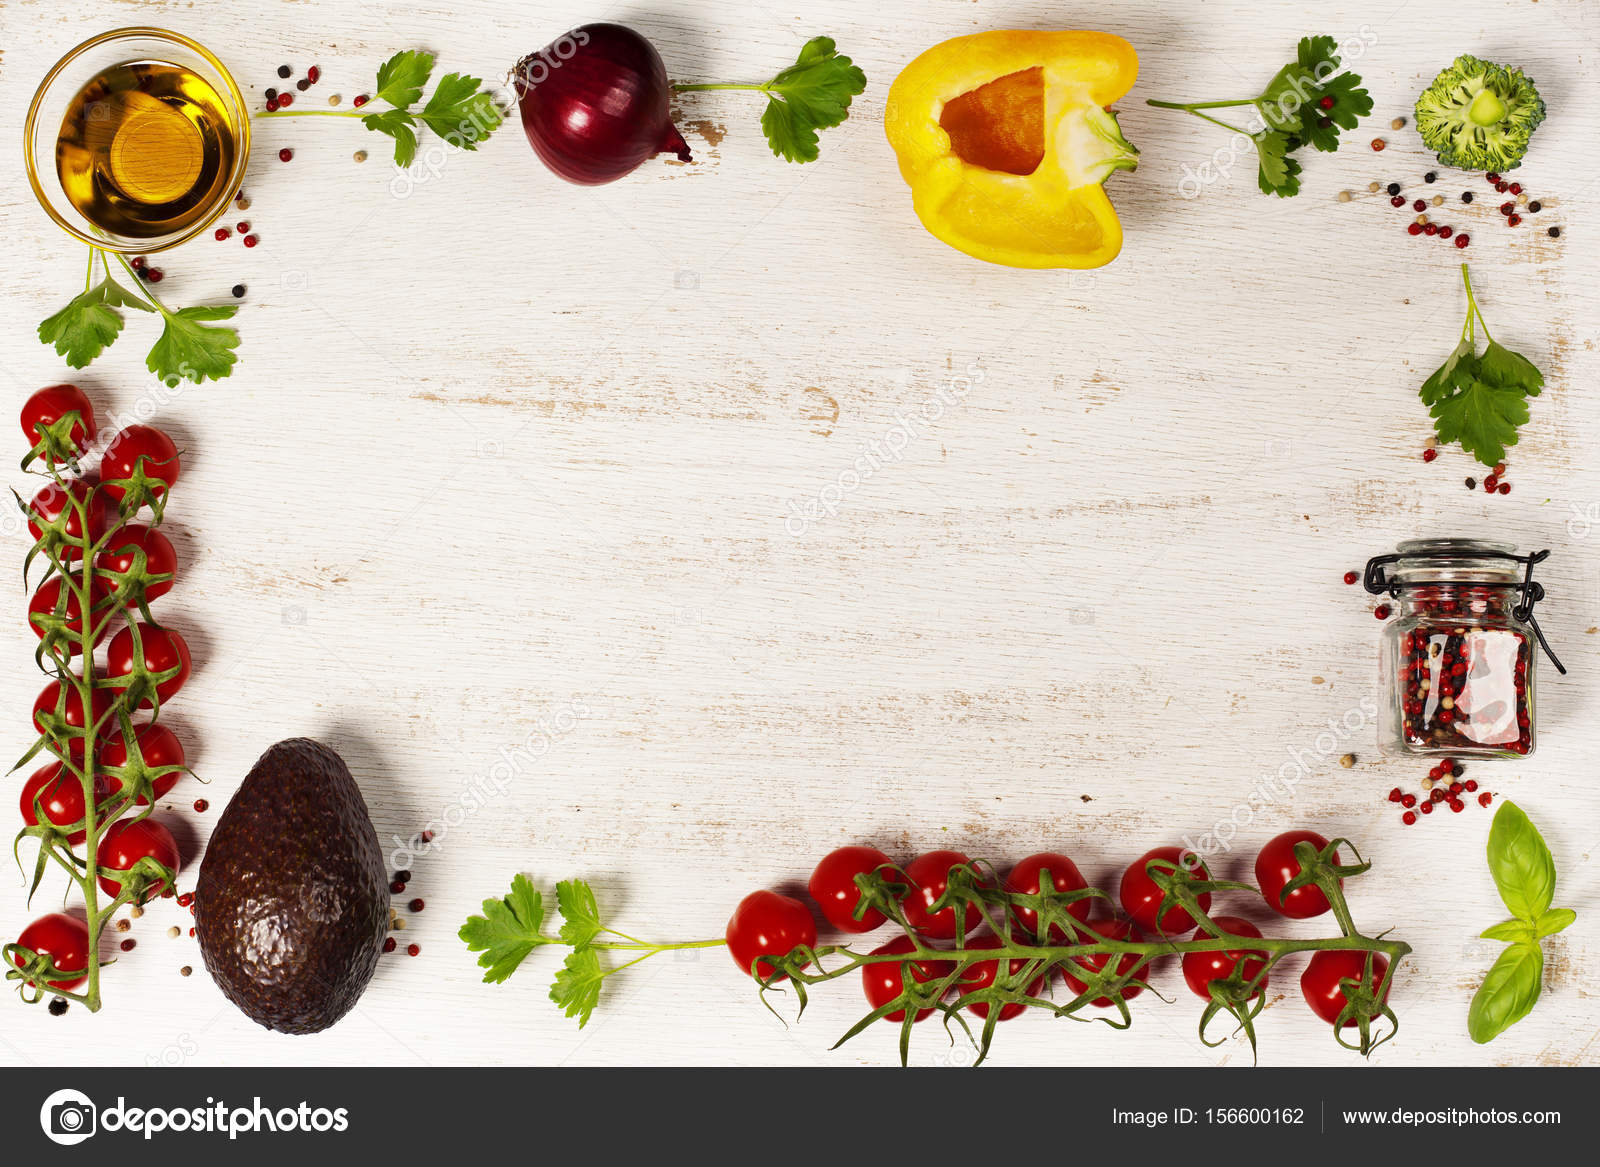 Healthy food background Stock Photo by ©klenova 156600162